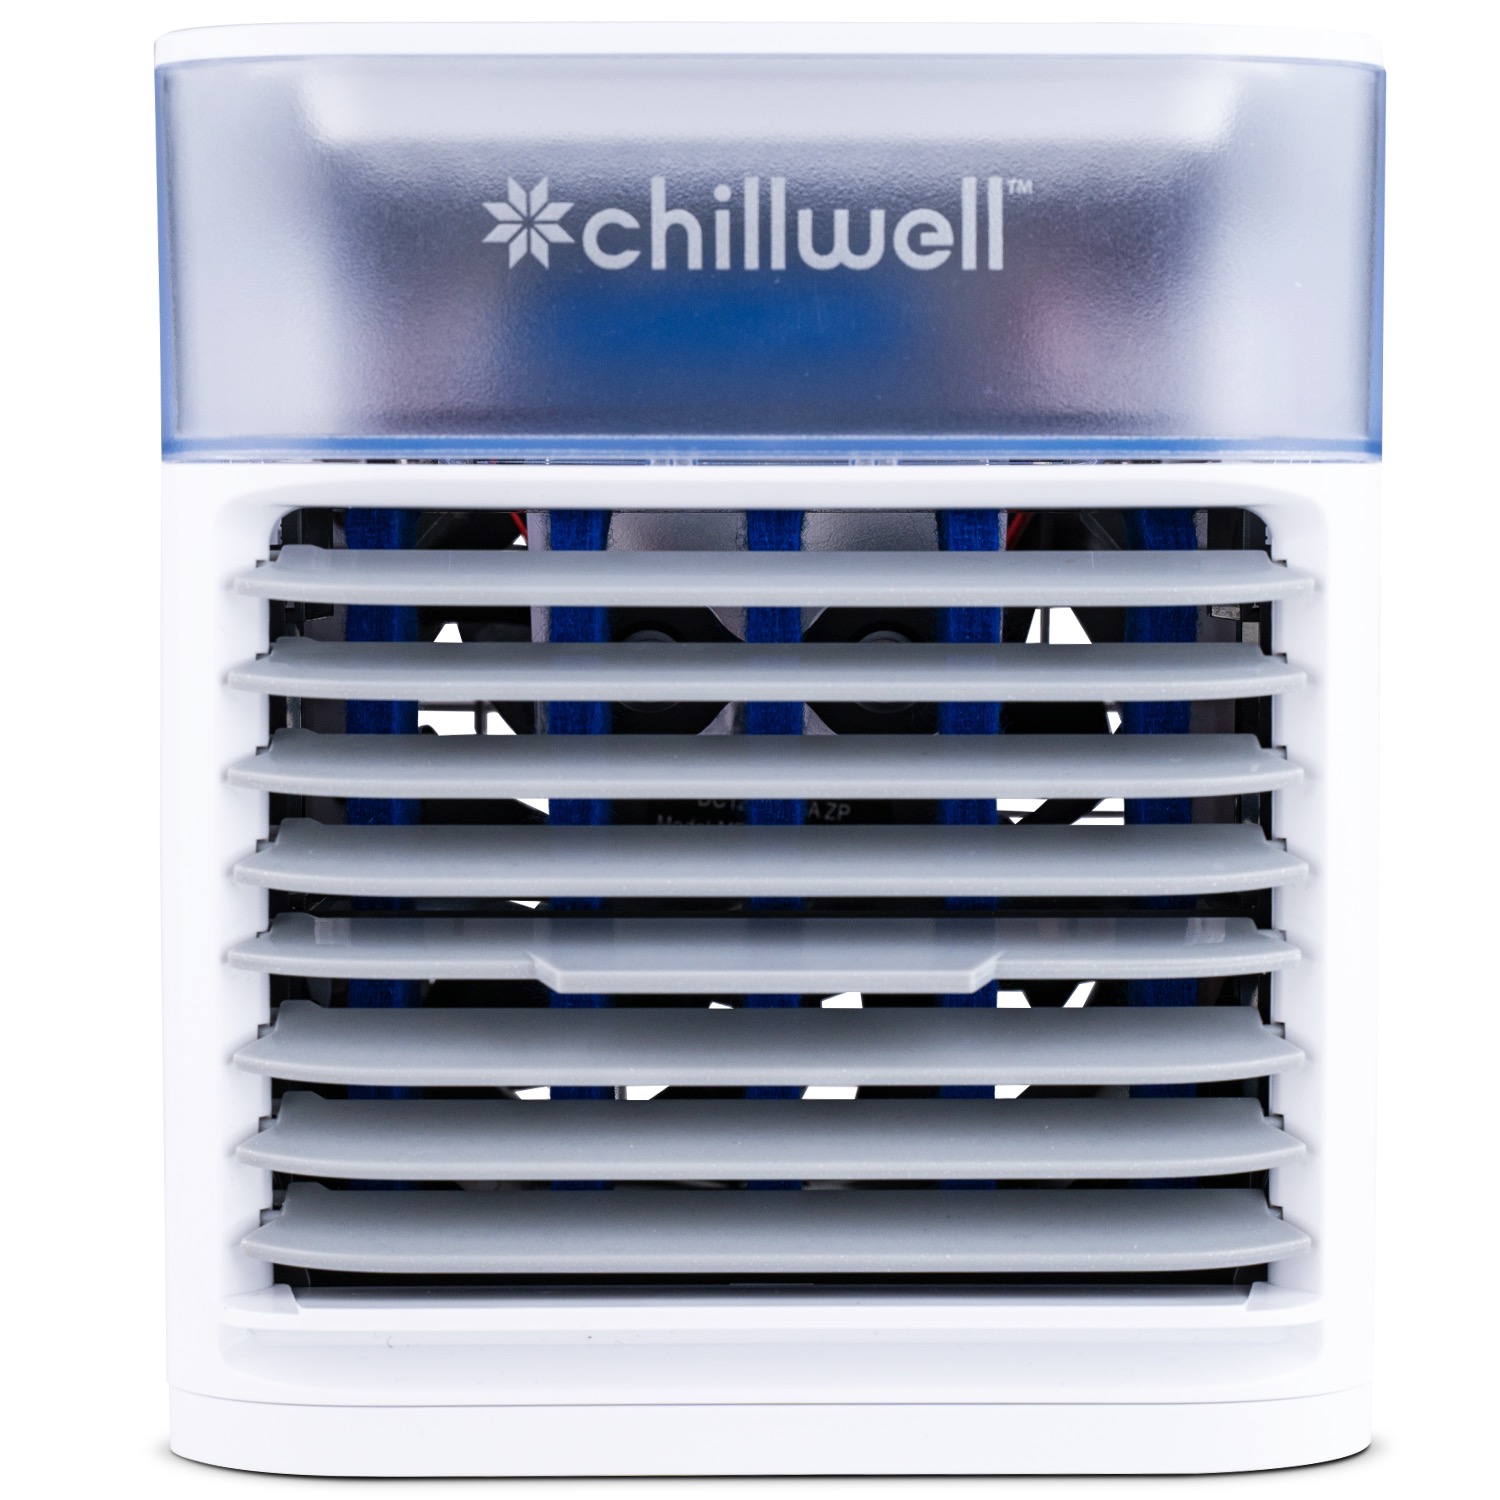 Air Cooler Chillwell Ac